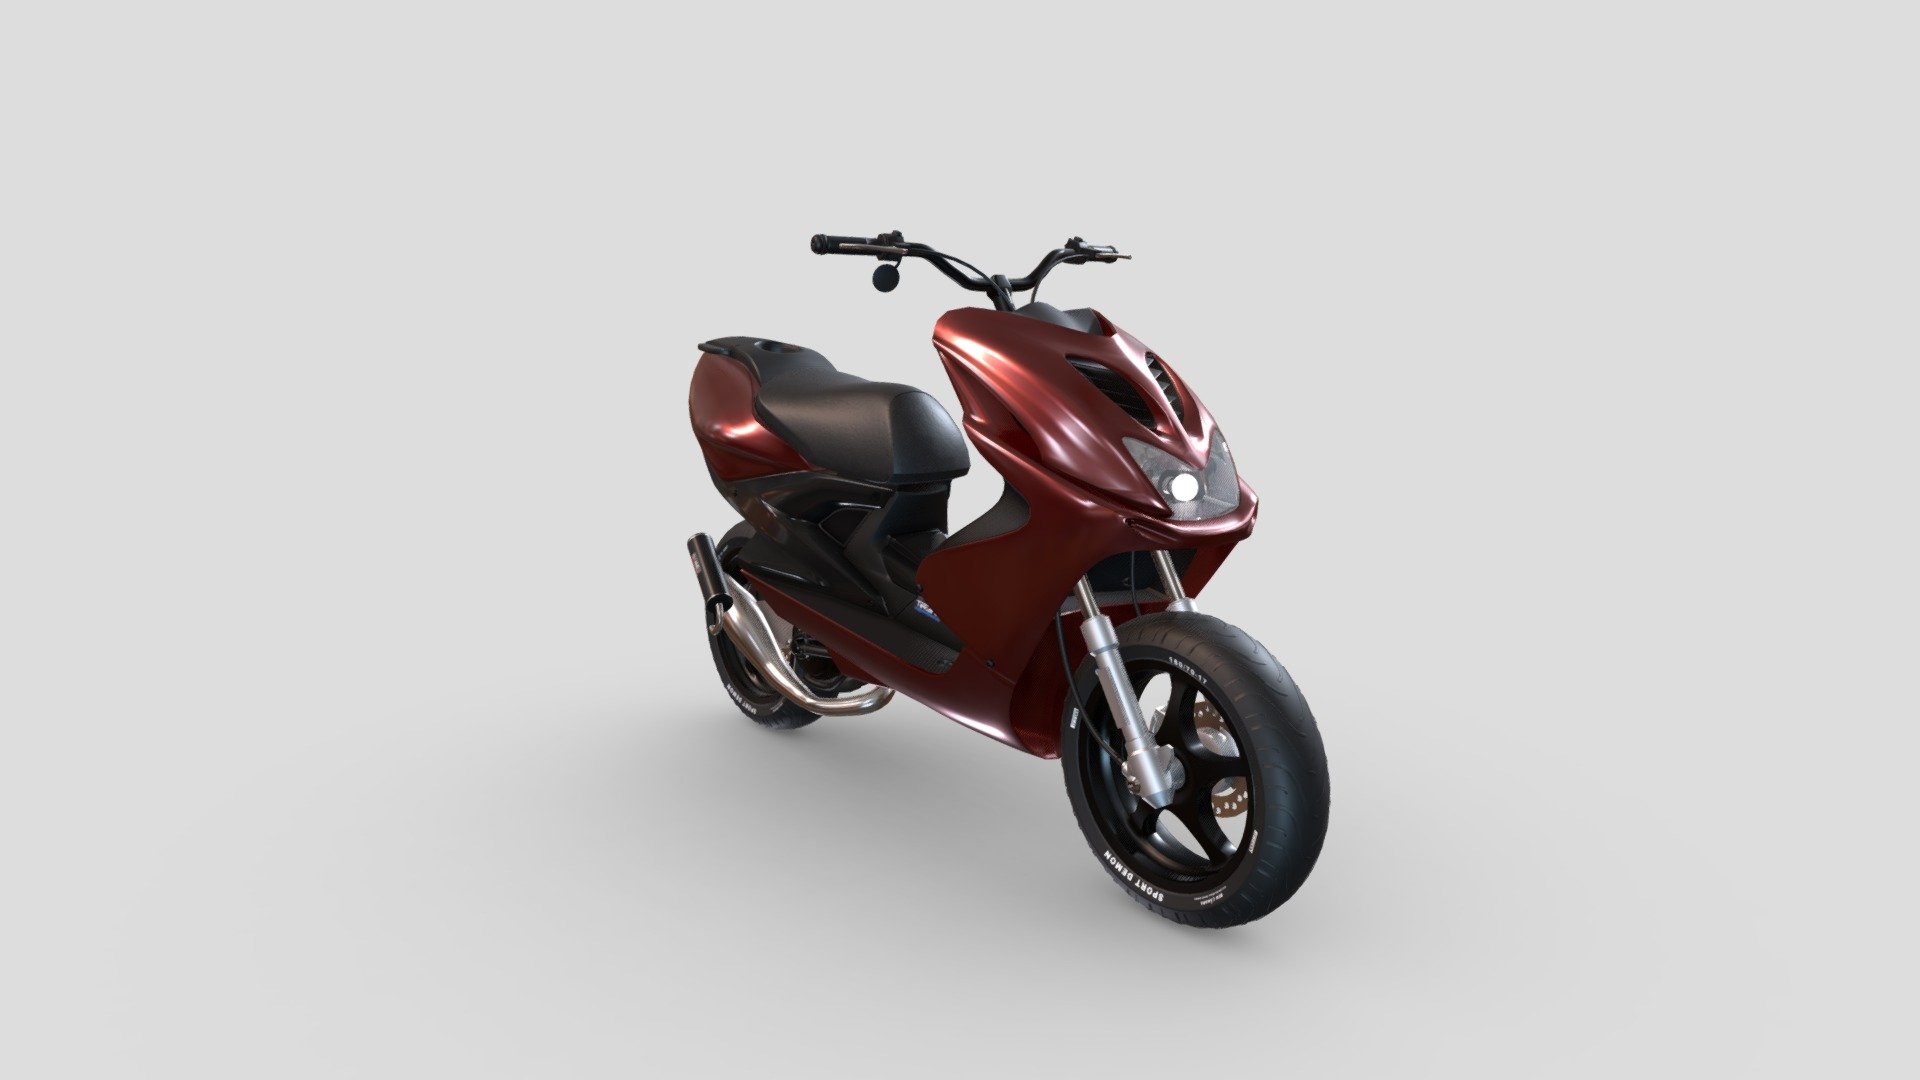 Yamaha aerox 50cc 2005
Based on vaahoanimator's 3d model on cgtrader

I added textures and modified the model but all credit goes to him.

 

  - Yamaha Aerox - 3D model by Niilo Poutanen (@niilo.poutanen) 3d model